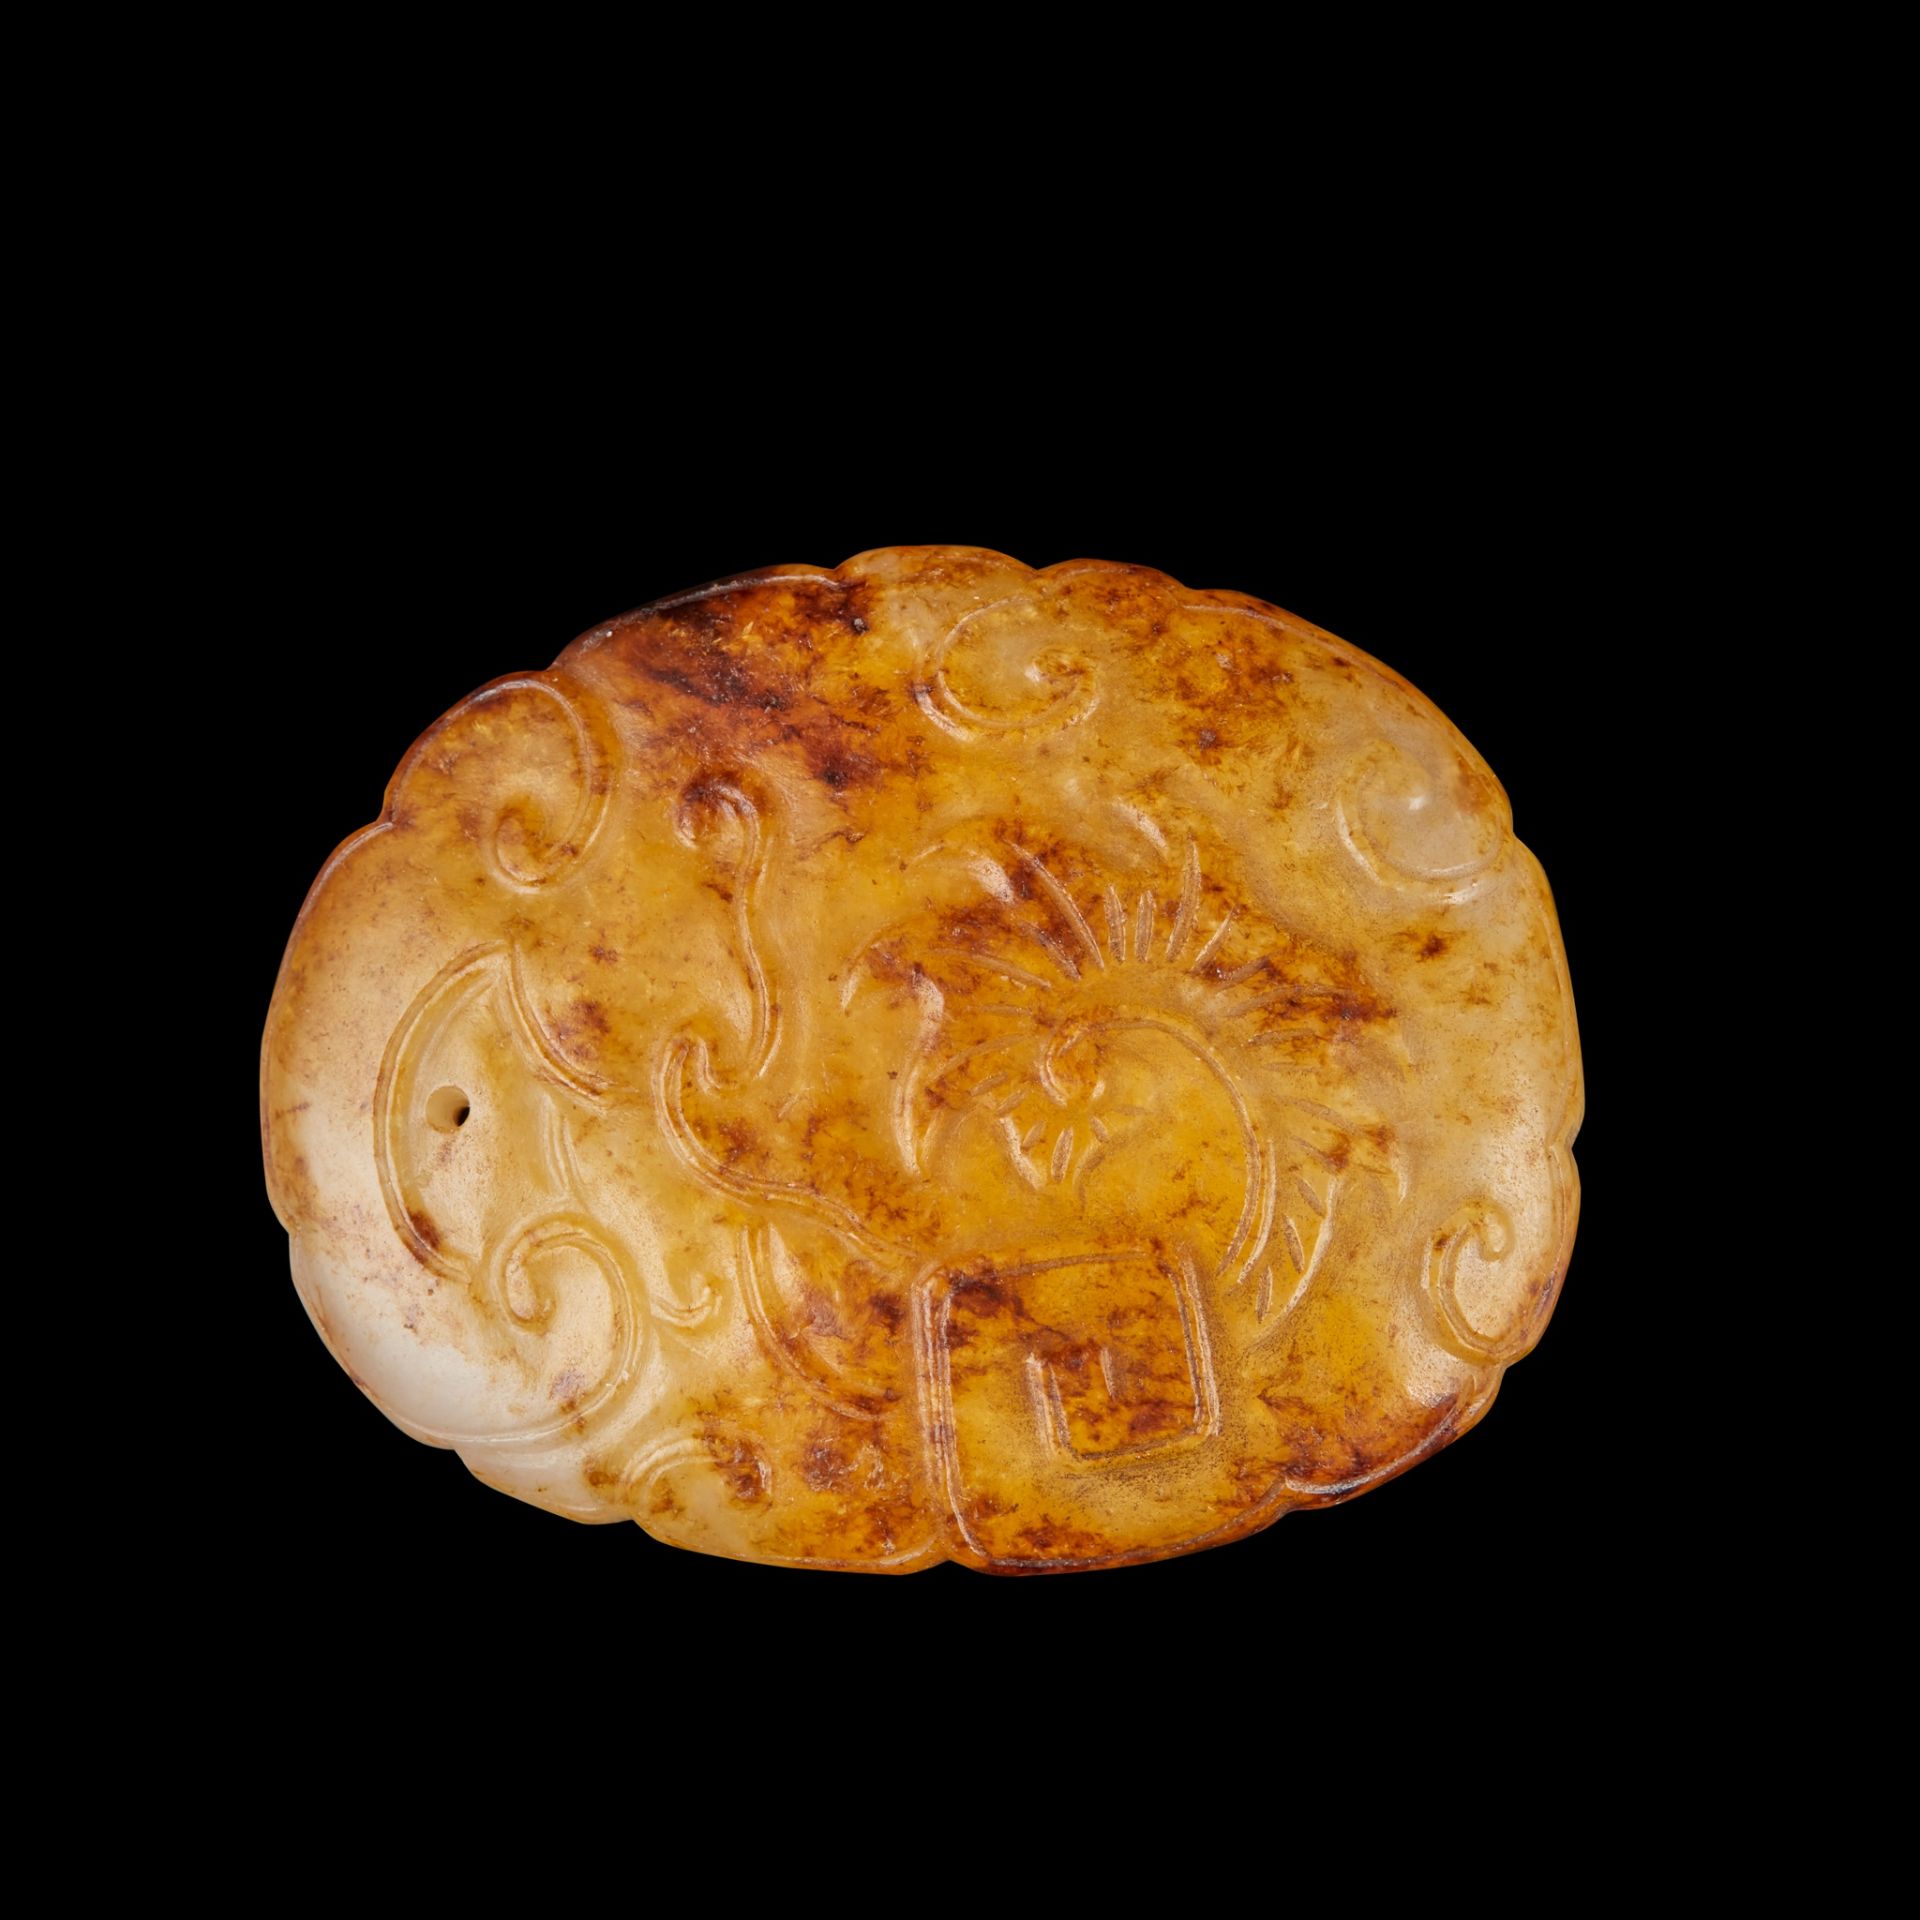 GREY AND RUSSET JADE PENDANT QING DYNASTY, 19TH CENTURY - Image 2 of 3